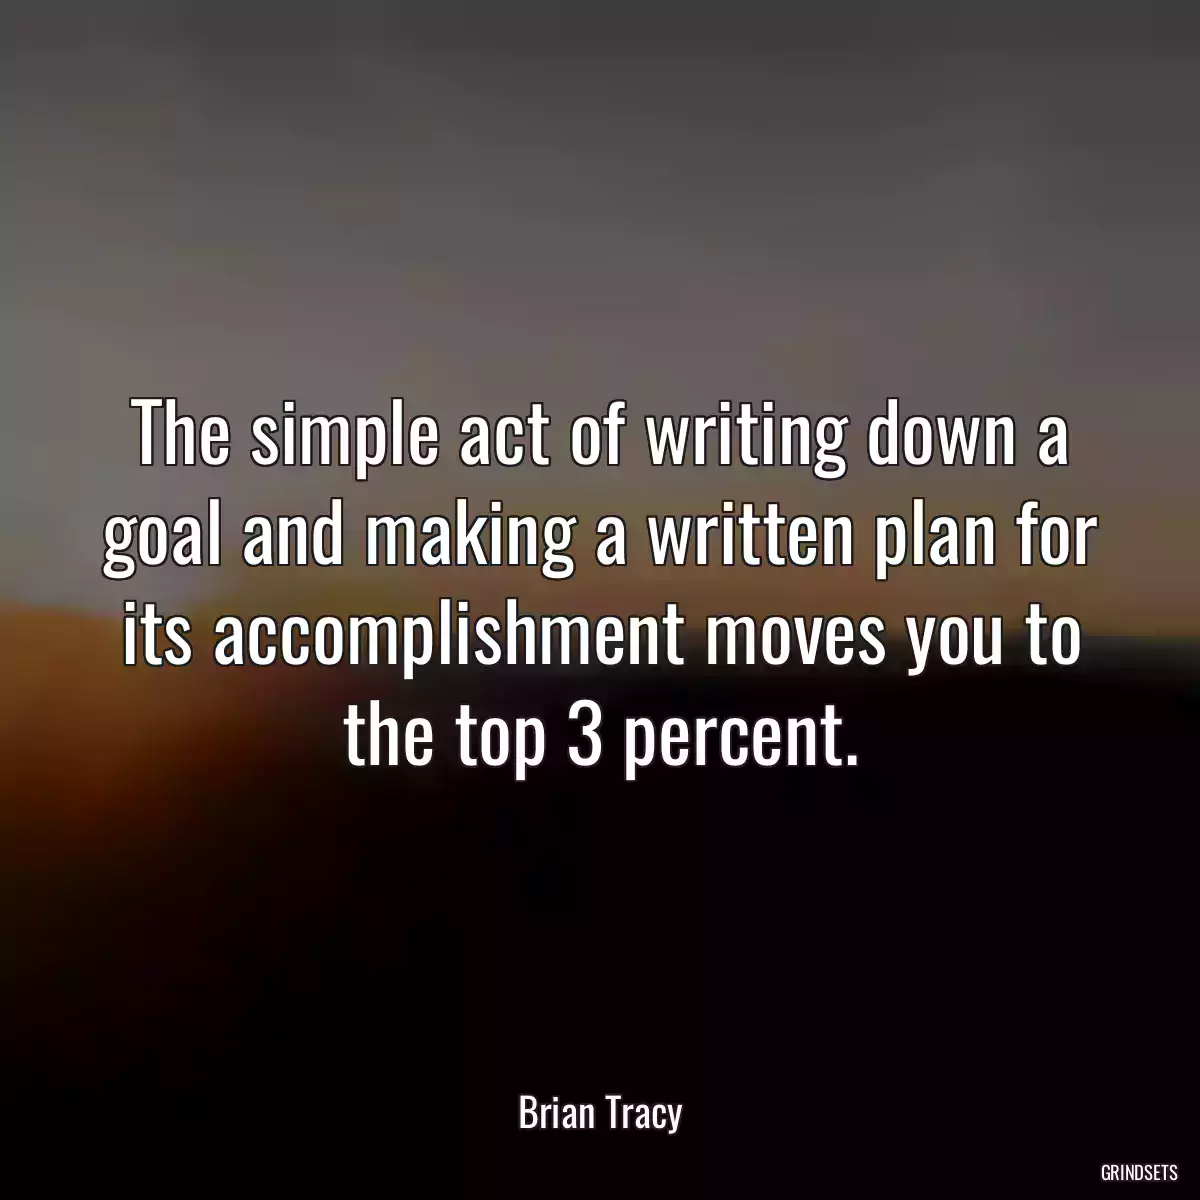 The simple act of writing down a goal and making a written plan for its accomplishment moves you to the top 3 percent.